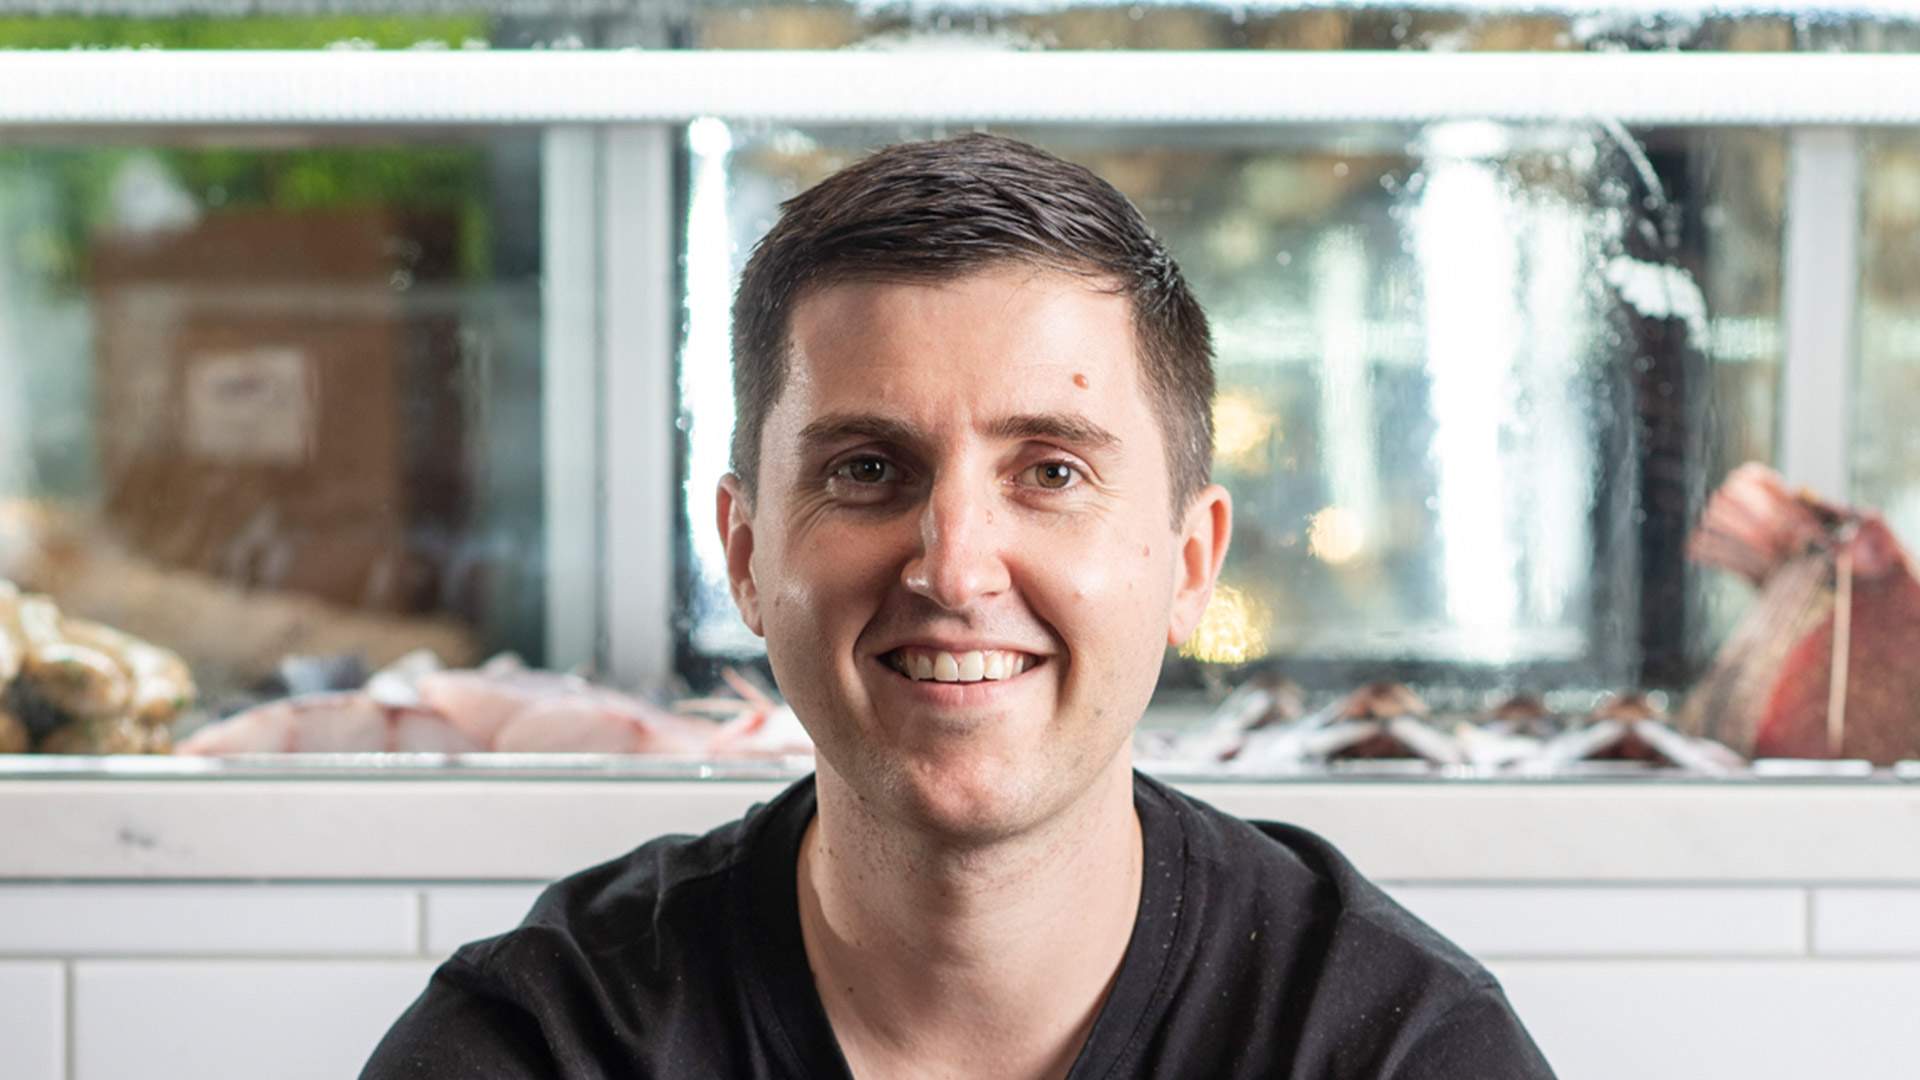 Coming Soon: Josh Niland Is Going Global with a New Sustainable Seafood Restaurant in Singapore